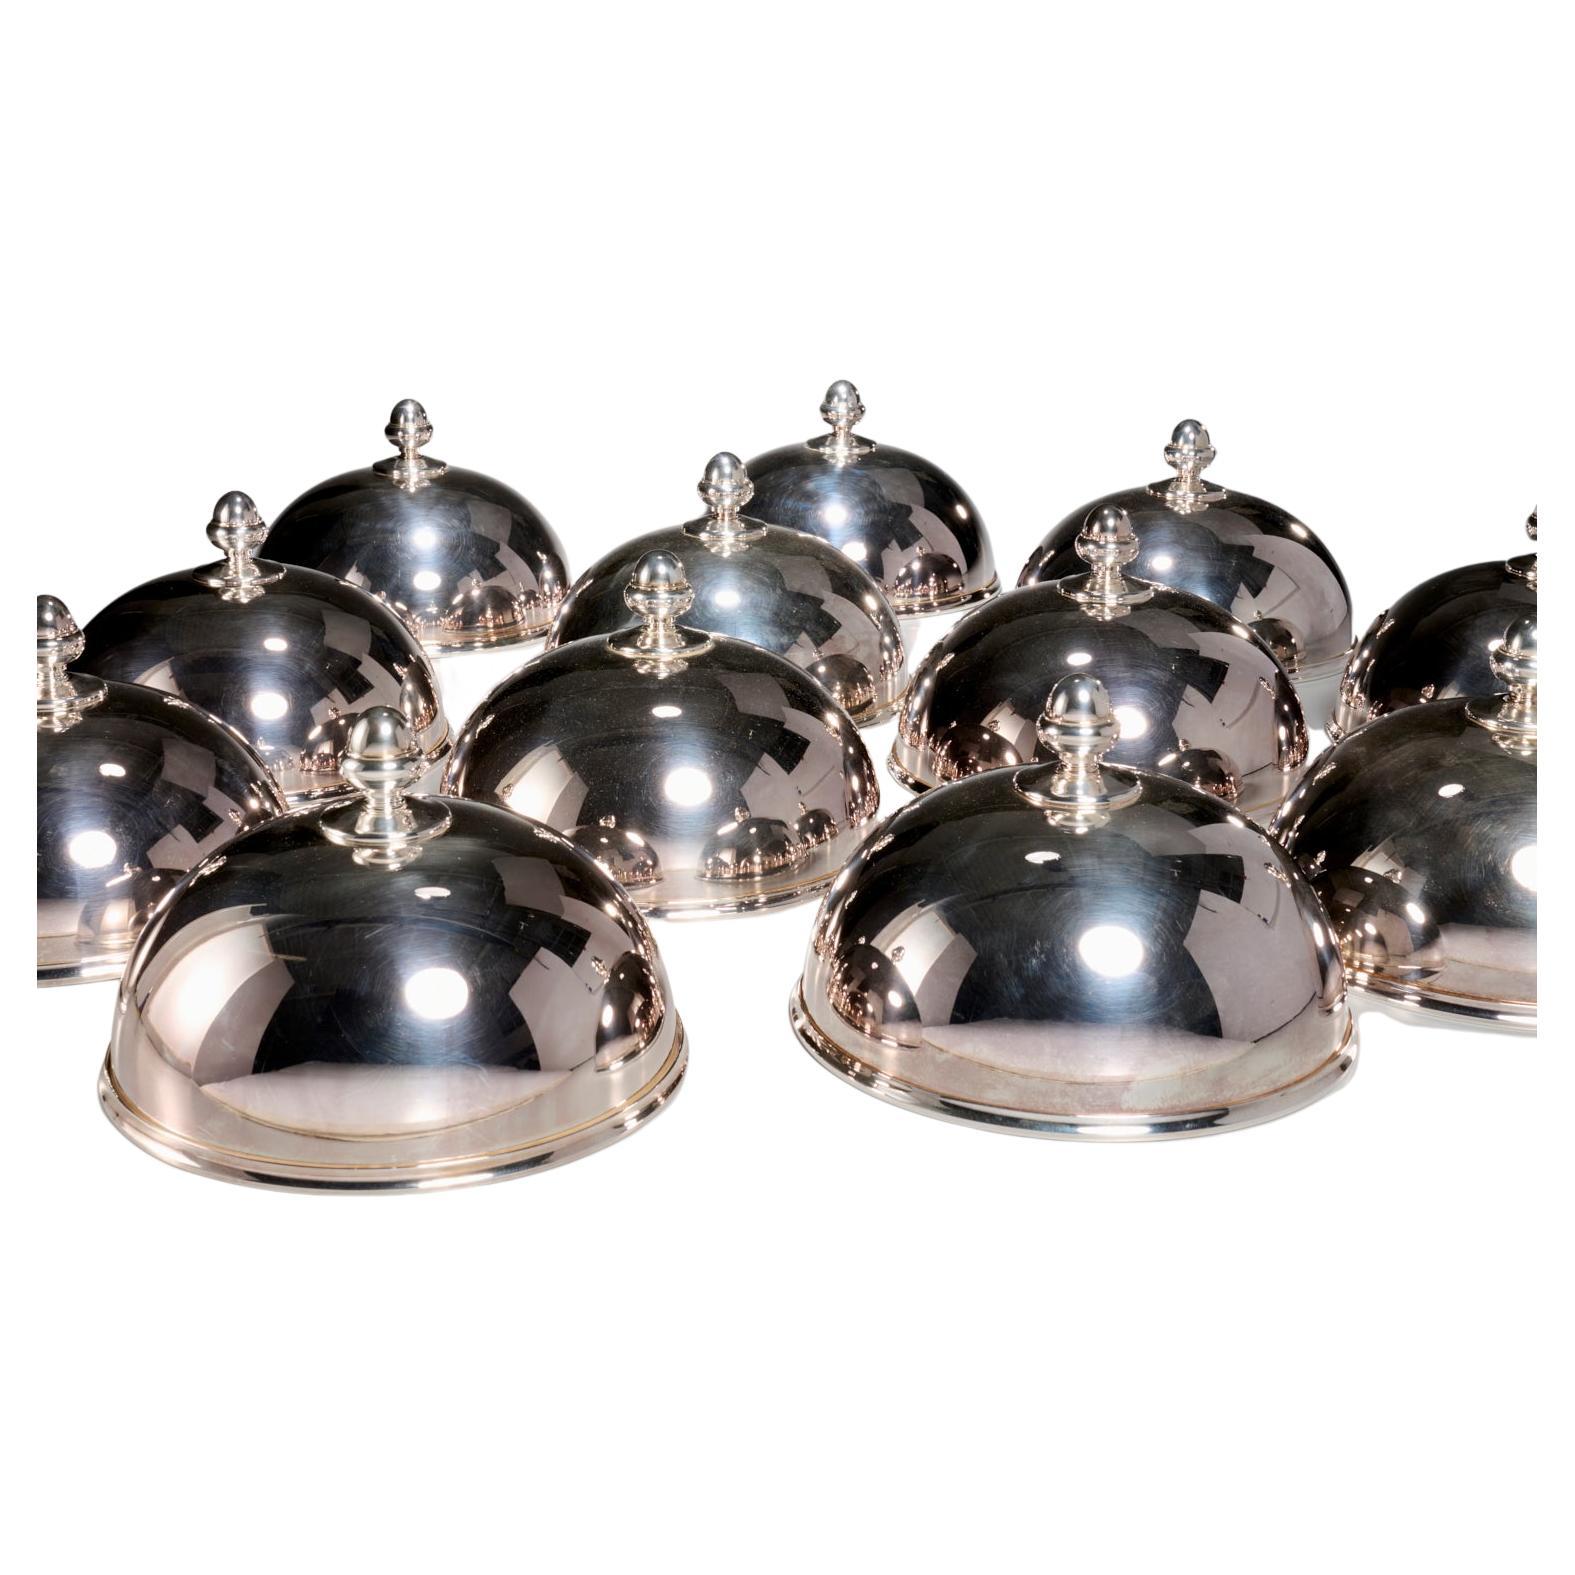 12 "Rencontre" Silver-Plated Domed Plate Covers W. Acorn Handles by Ercuis Paris For Sale